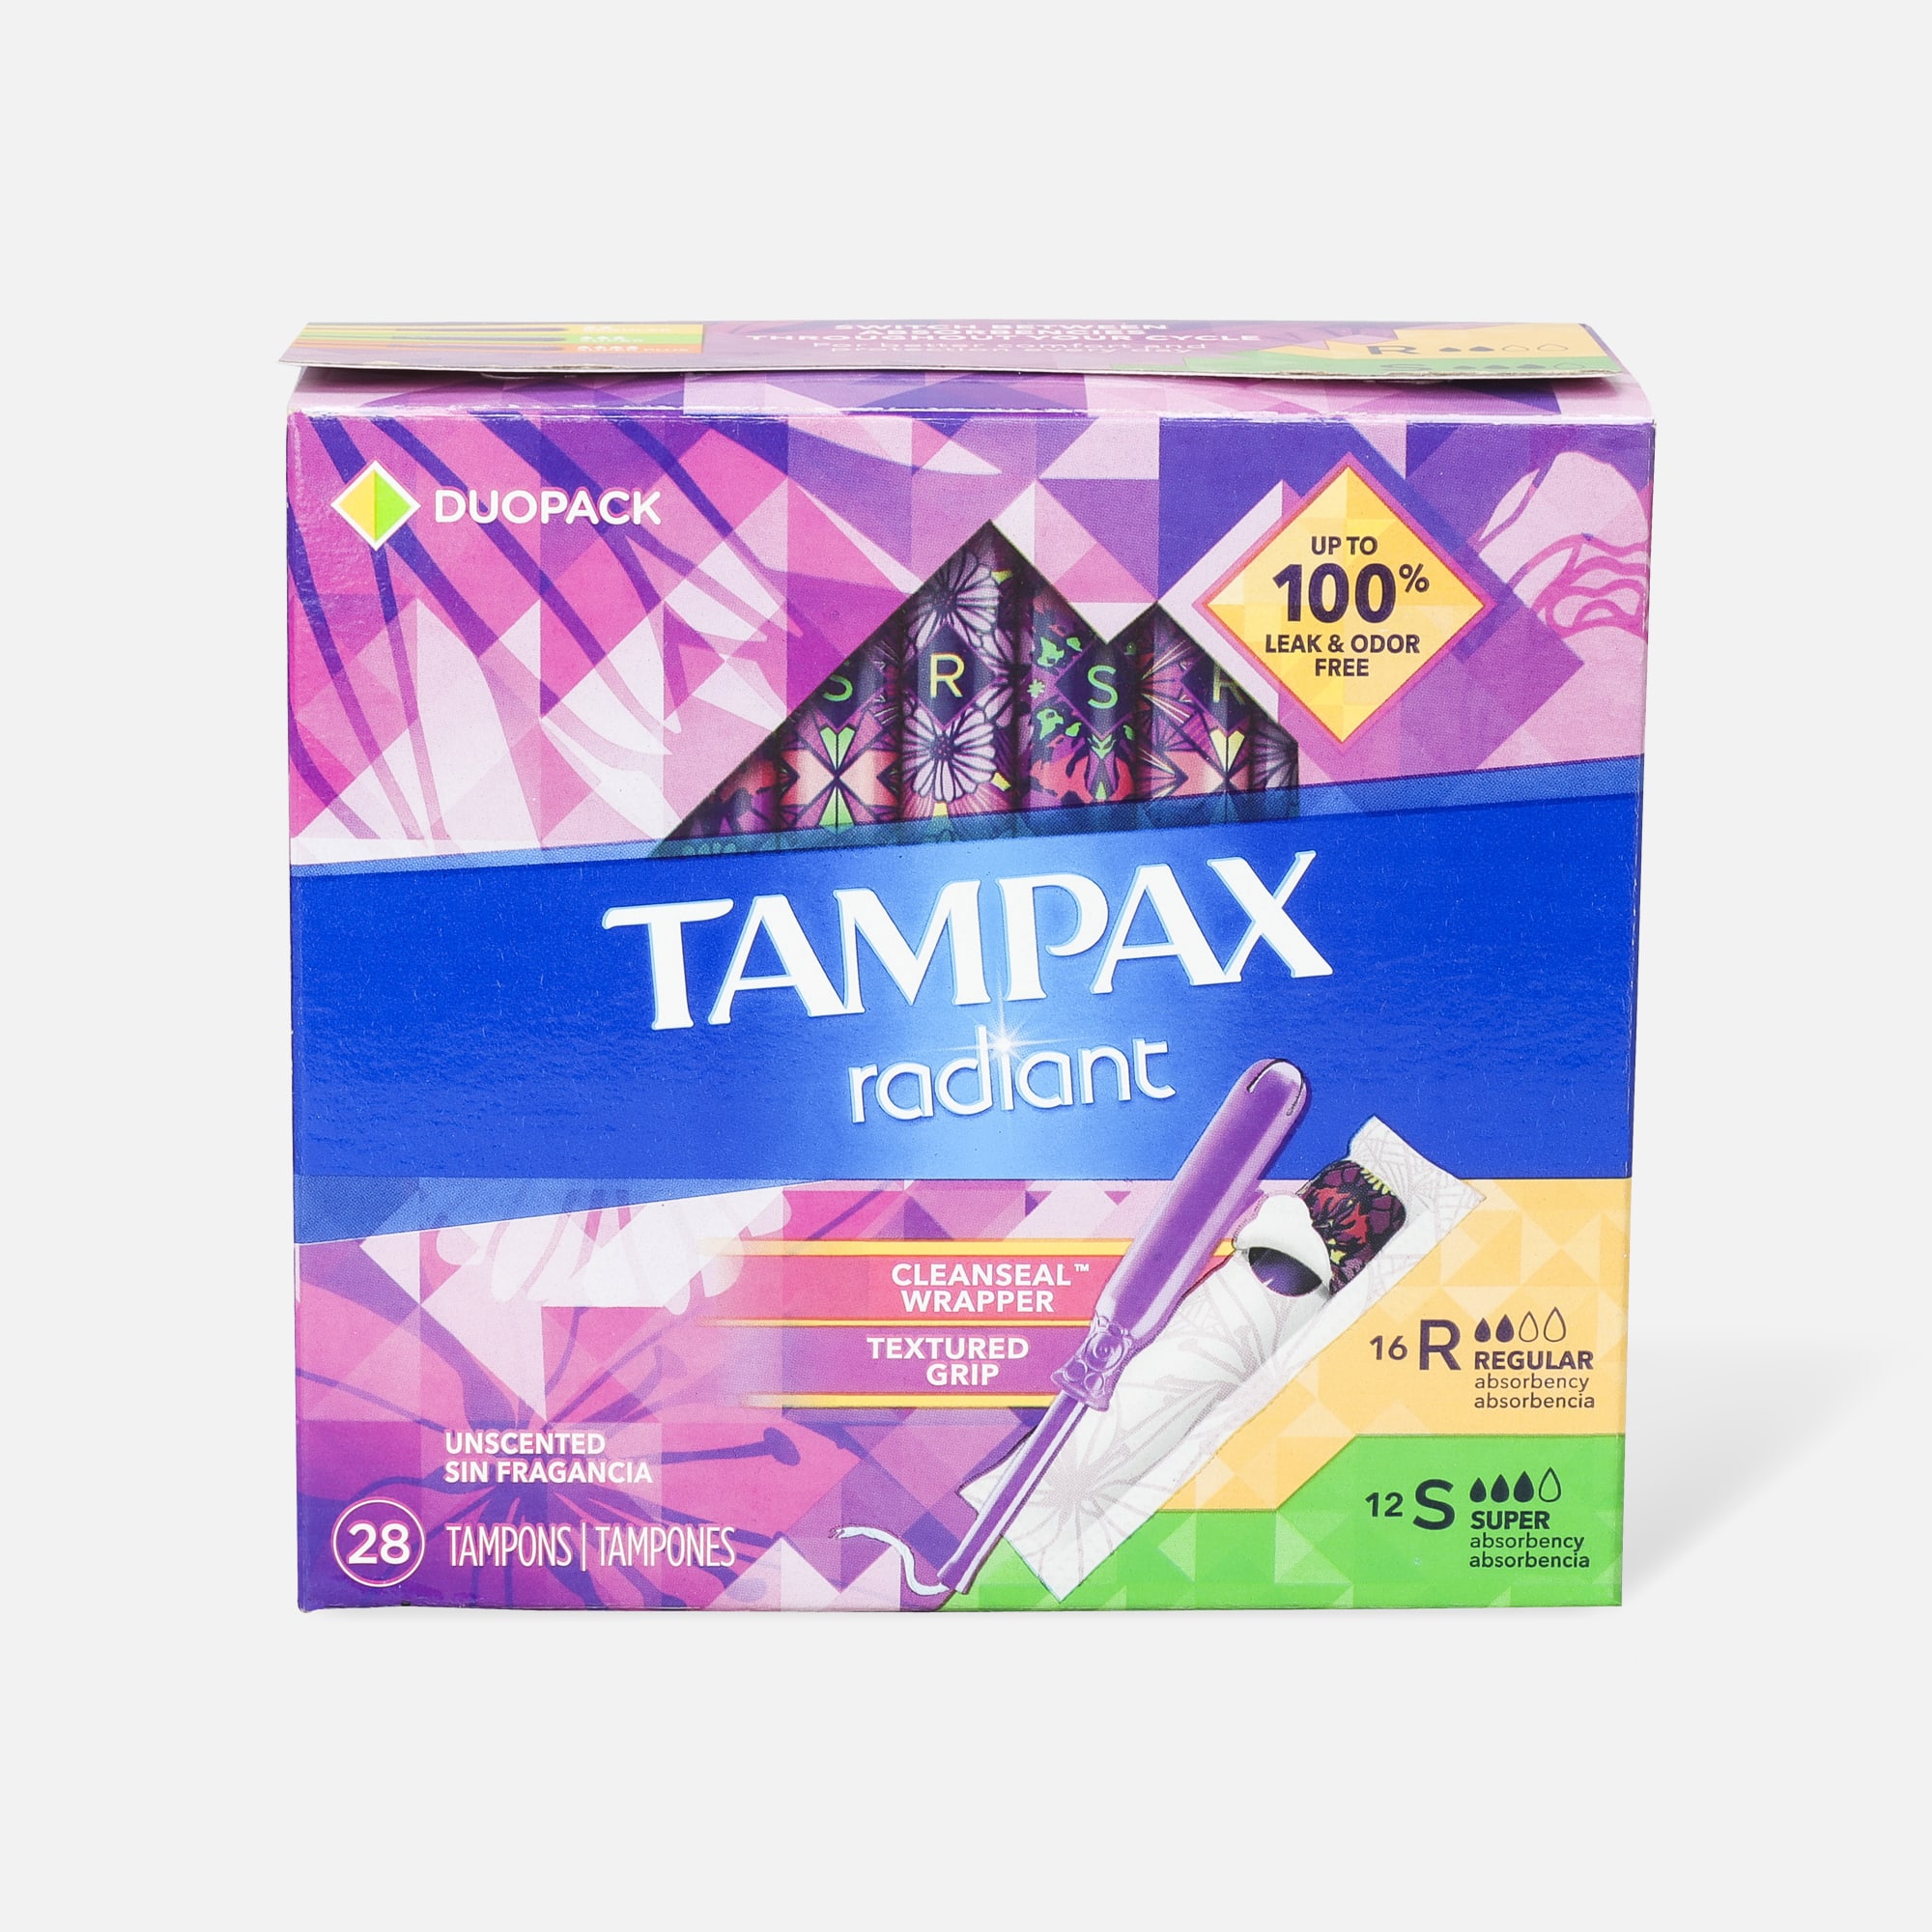 Tampax Radiant Tampons Duo Pack, Regular/Super Absorbency with BPA-Free  Plastic Applicator and LeakGuard Braid, Unscented, 28 Count